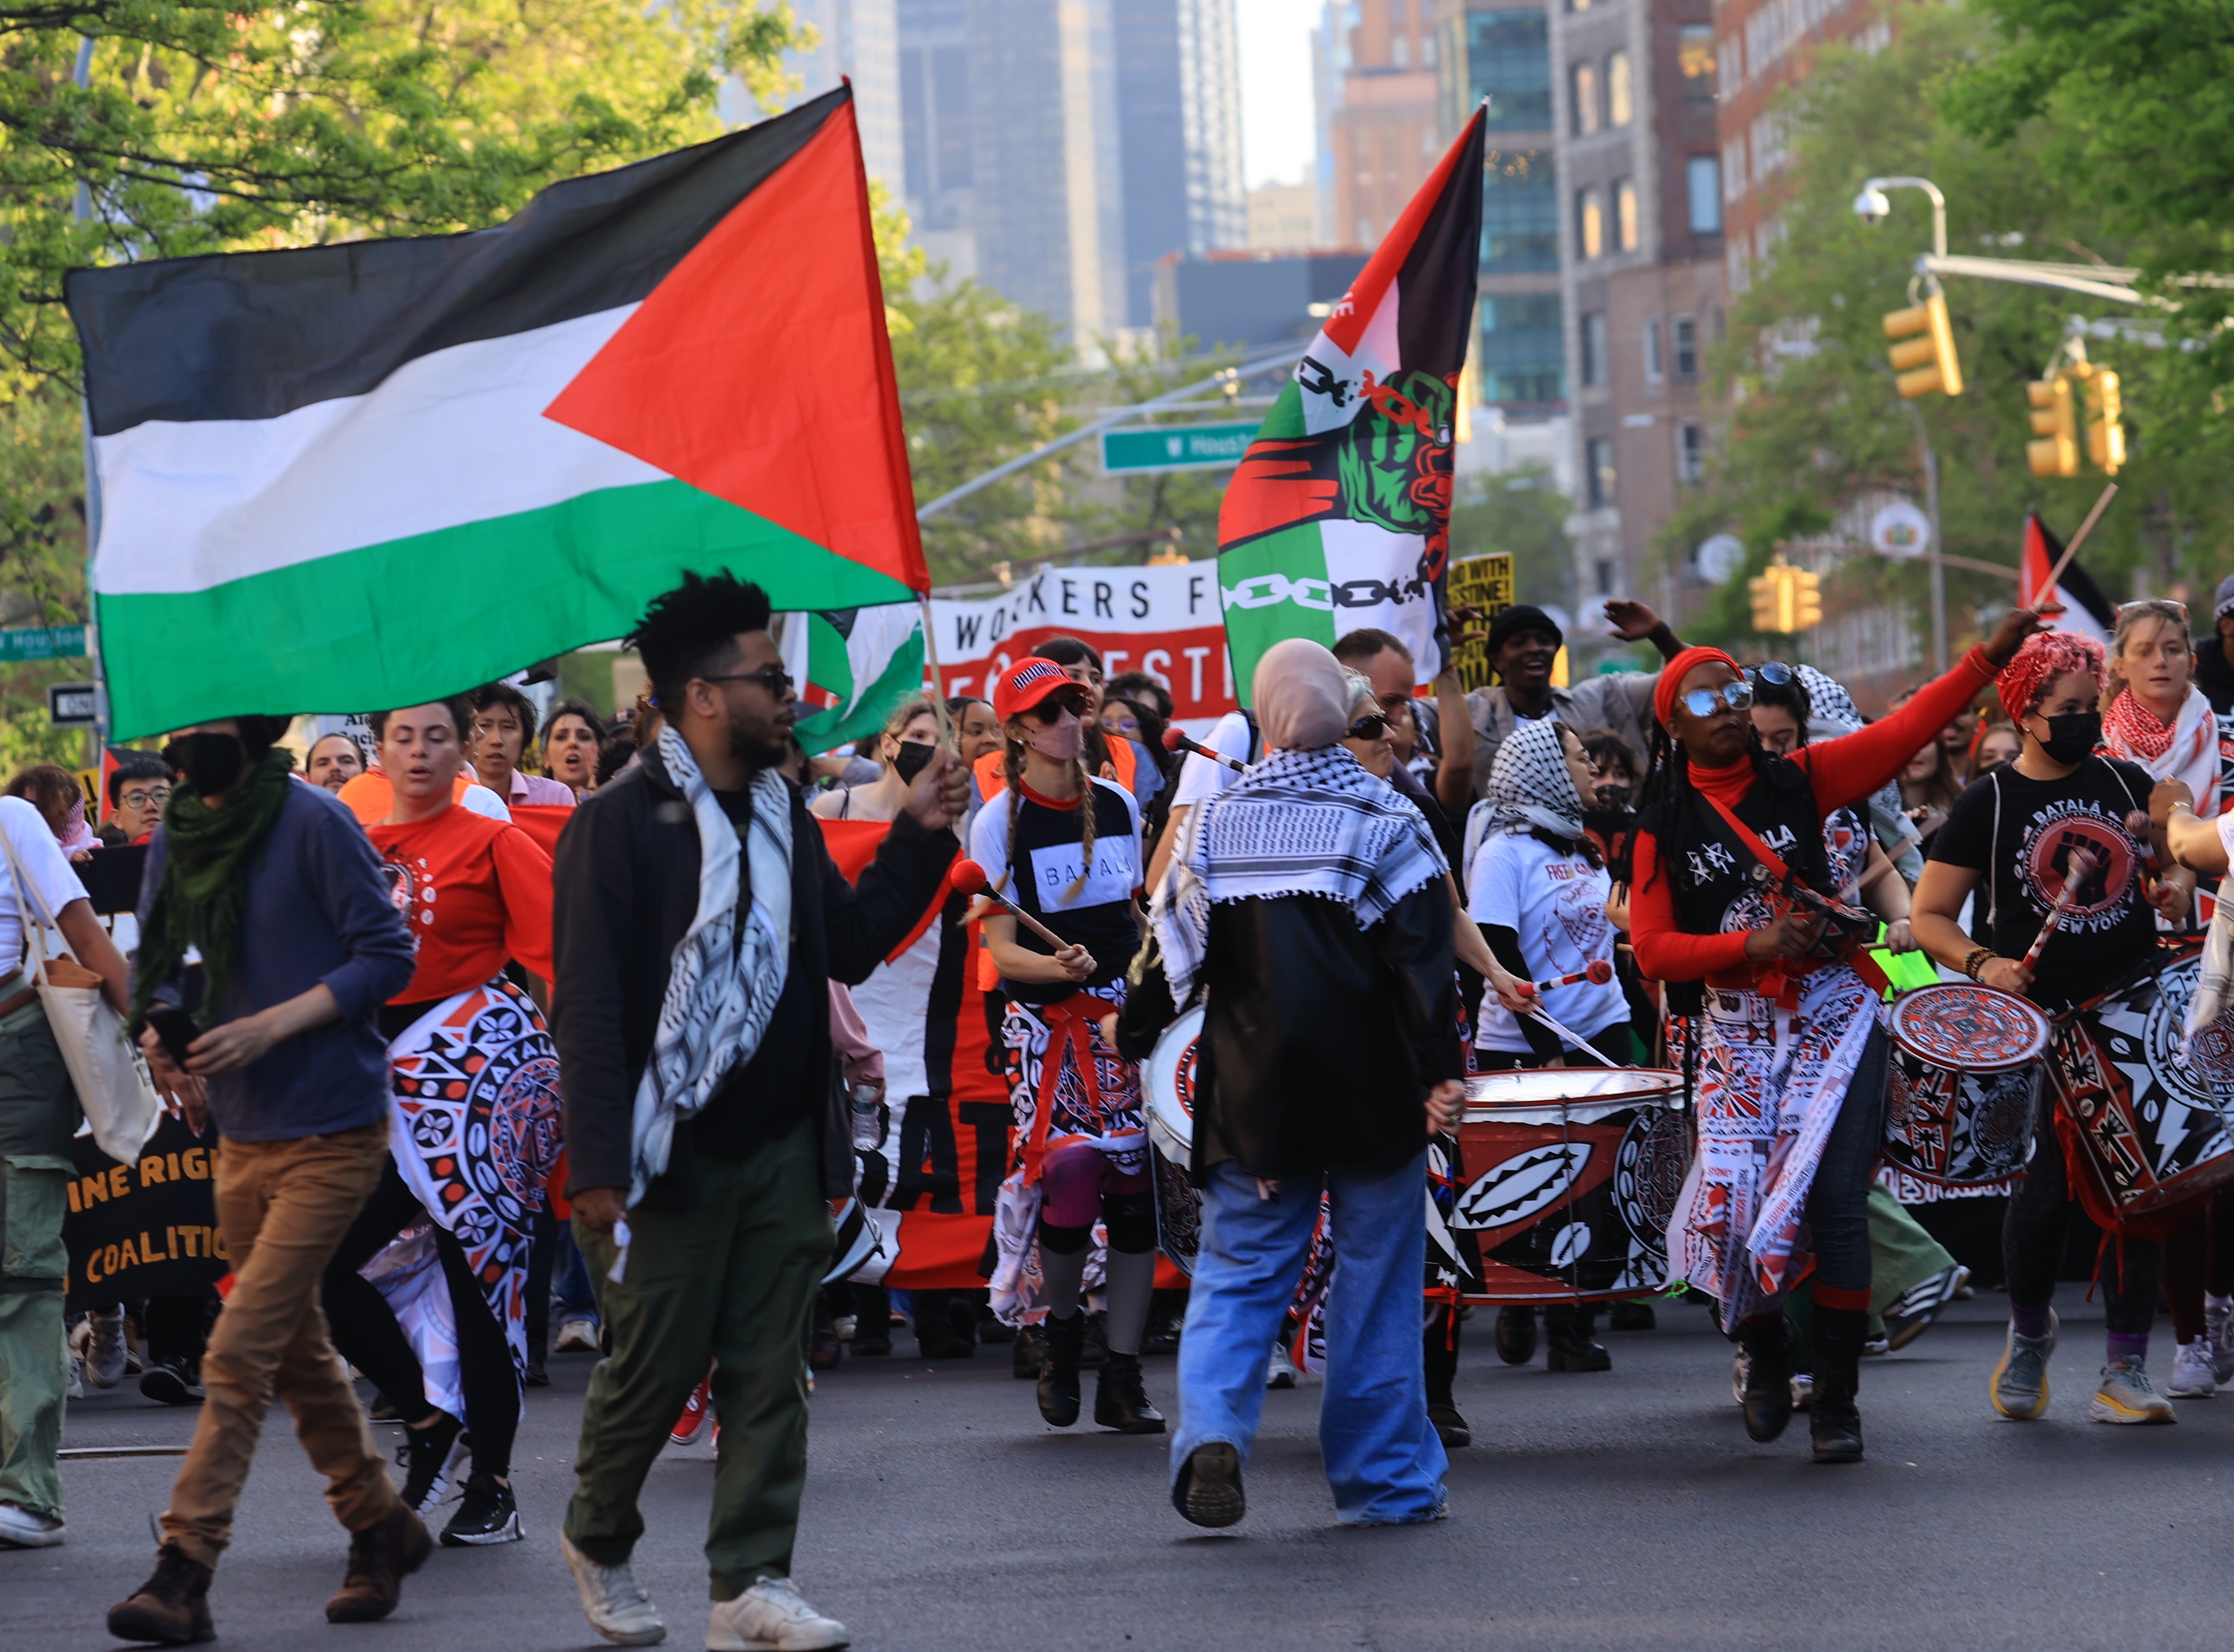 aa-20240502-34440230-34440187-may-day-rally-turned-into-propalestinian-demonstration-in-new-york.jpg